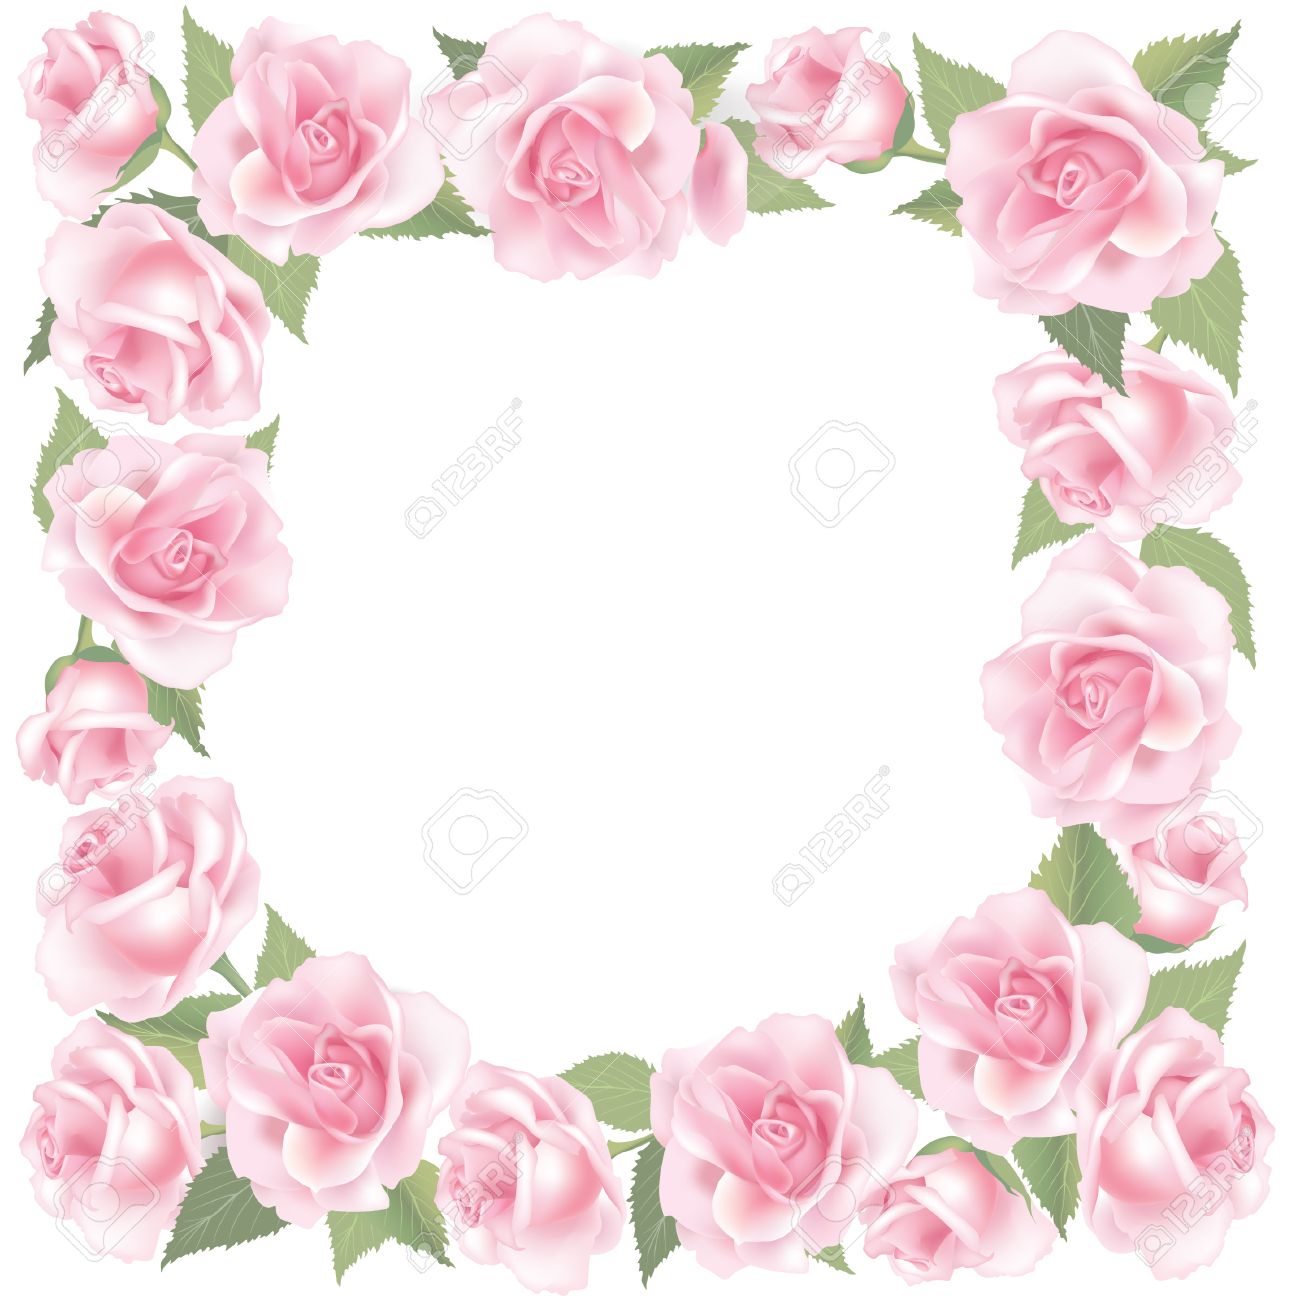 Flower Rose Background Floral Frame With Pink Roses Royalty Free